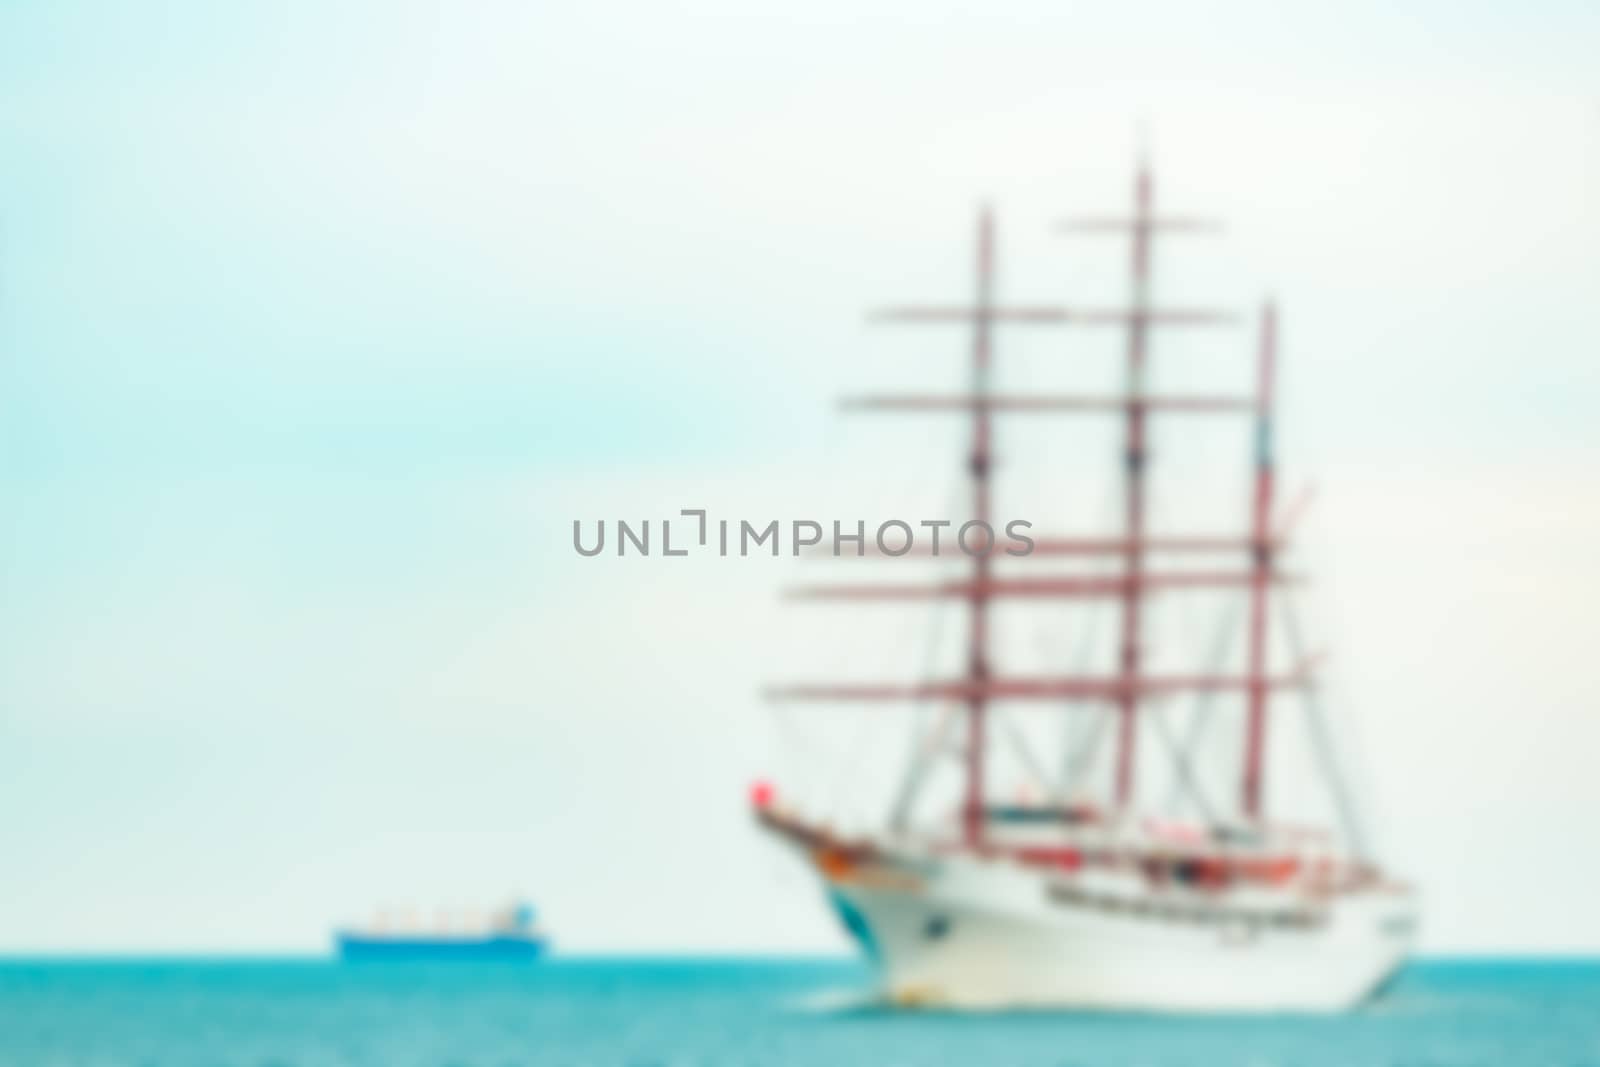 White sailing ship - blurred image by sengnsp